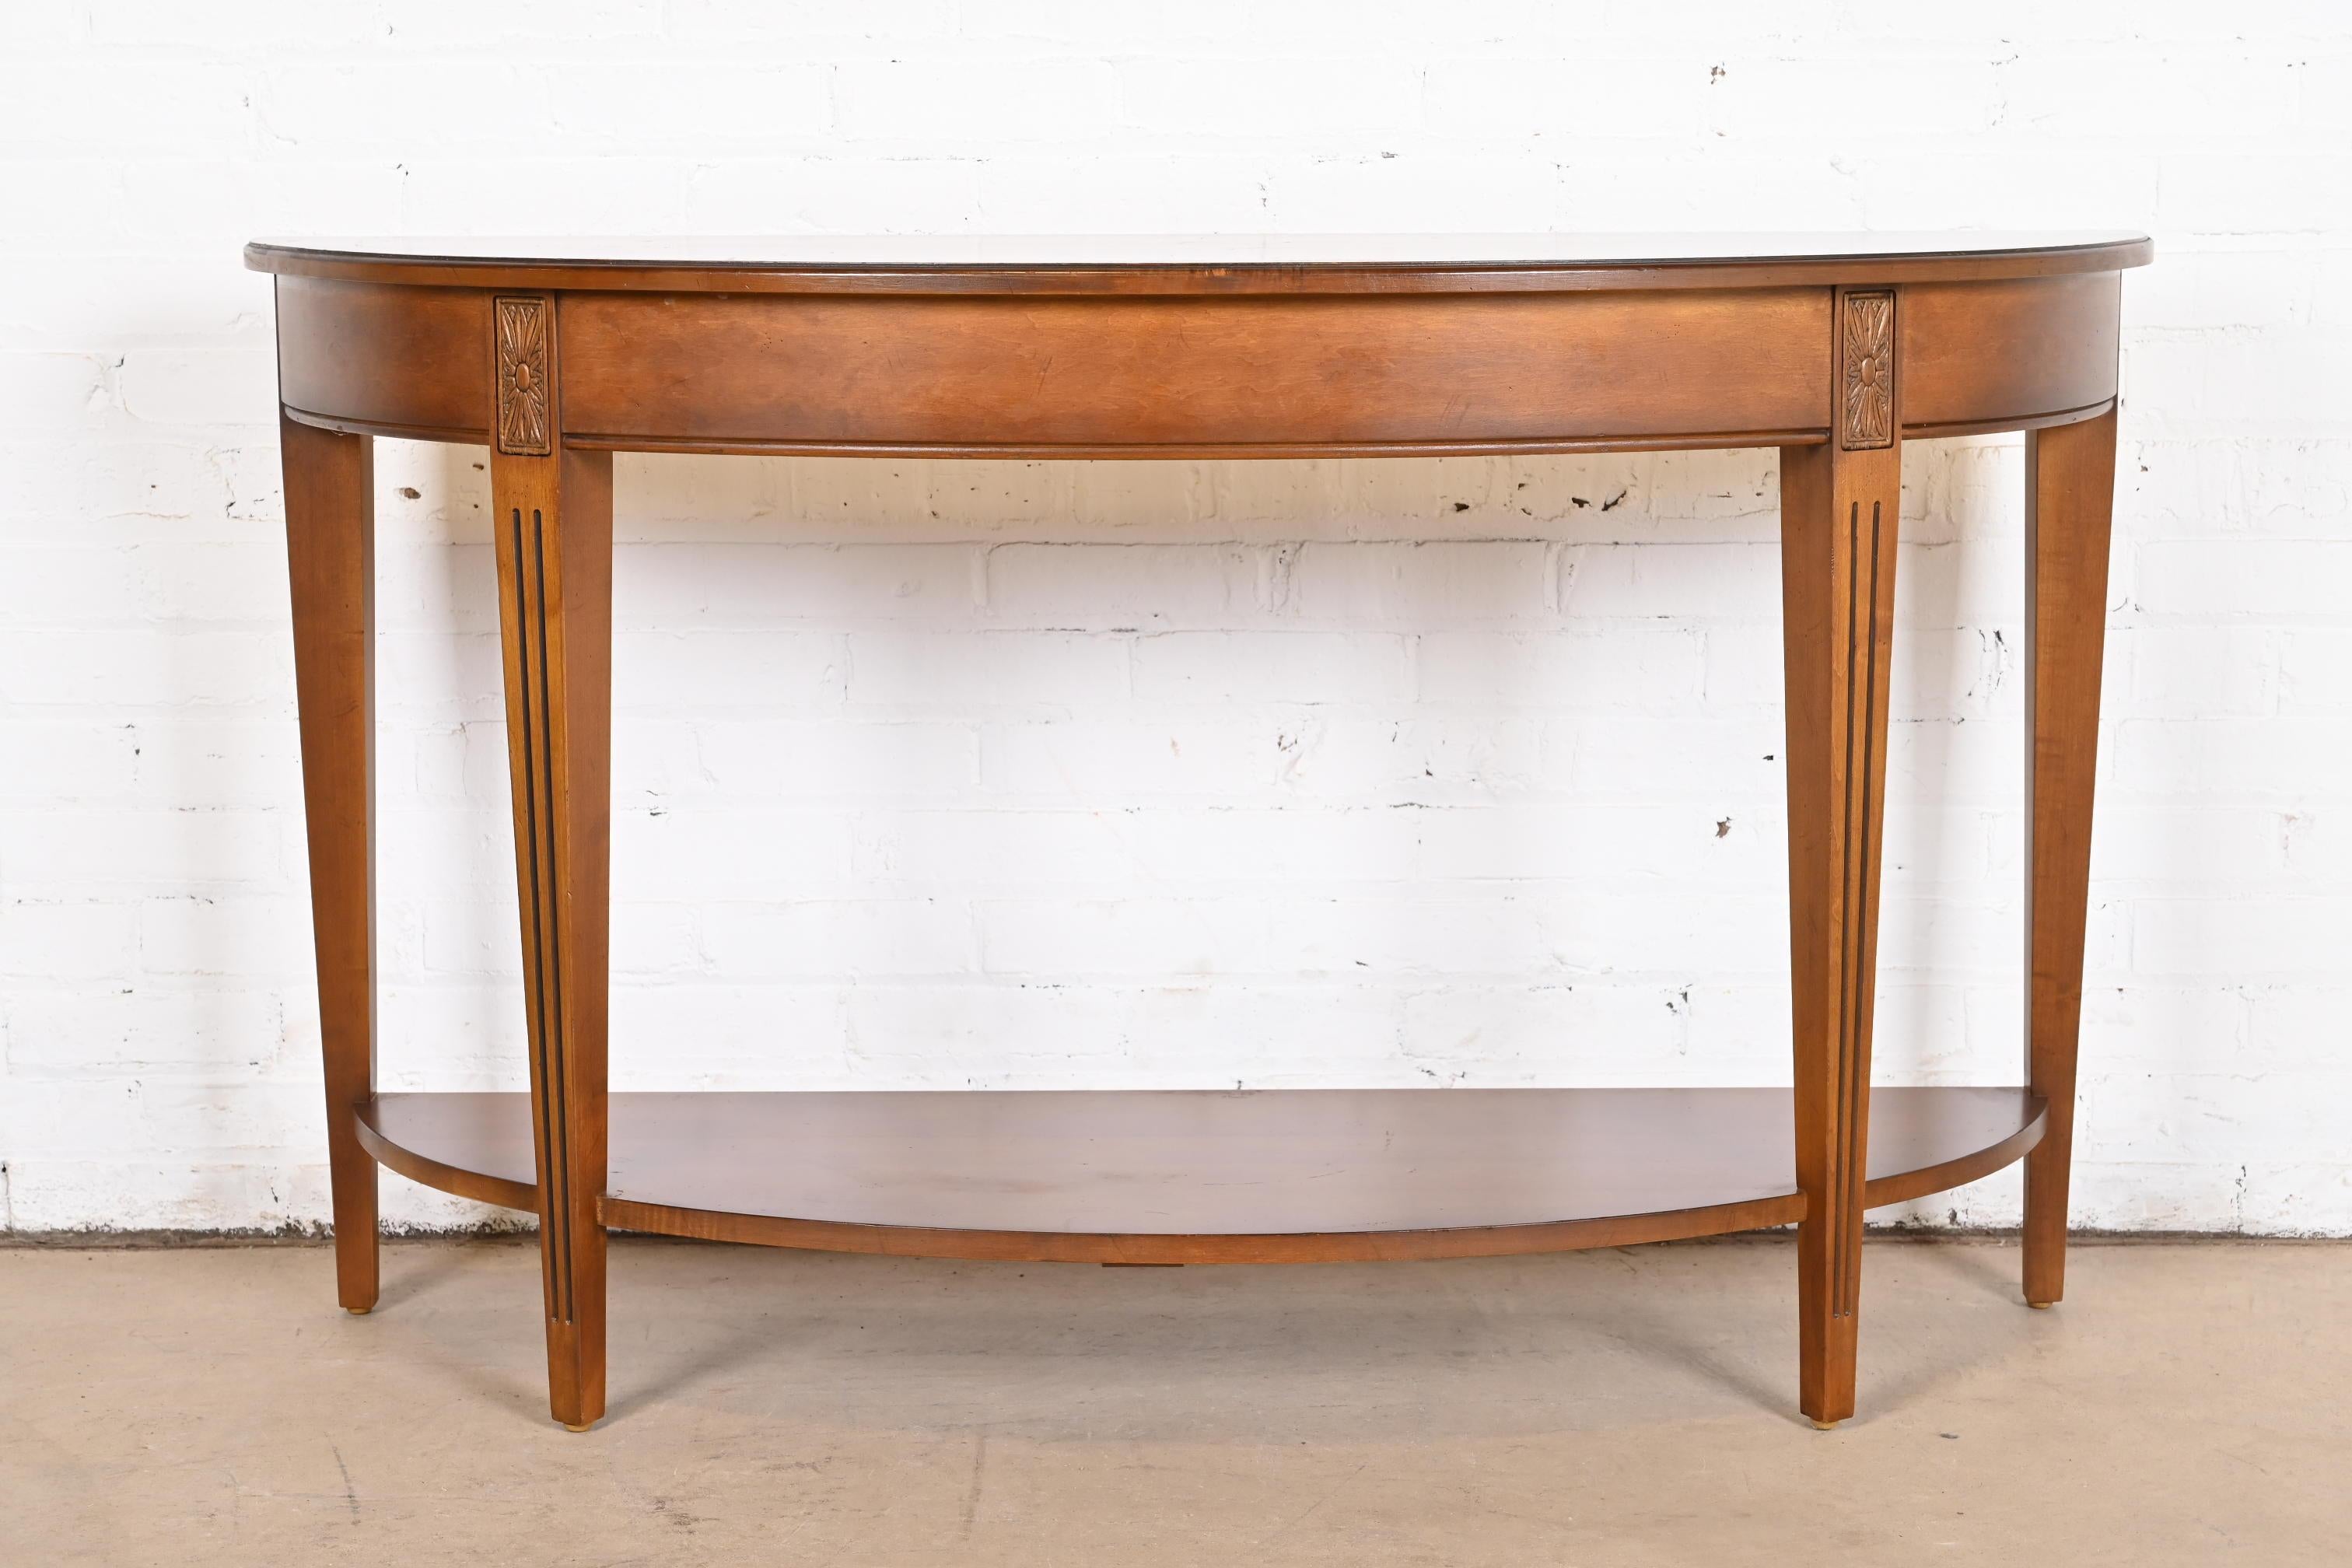 A gorgeous French Country style maple demilune console table or sofa table

USA, Late 20th Century

Measures: 52